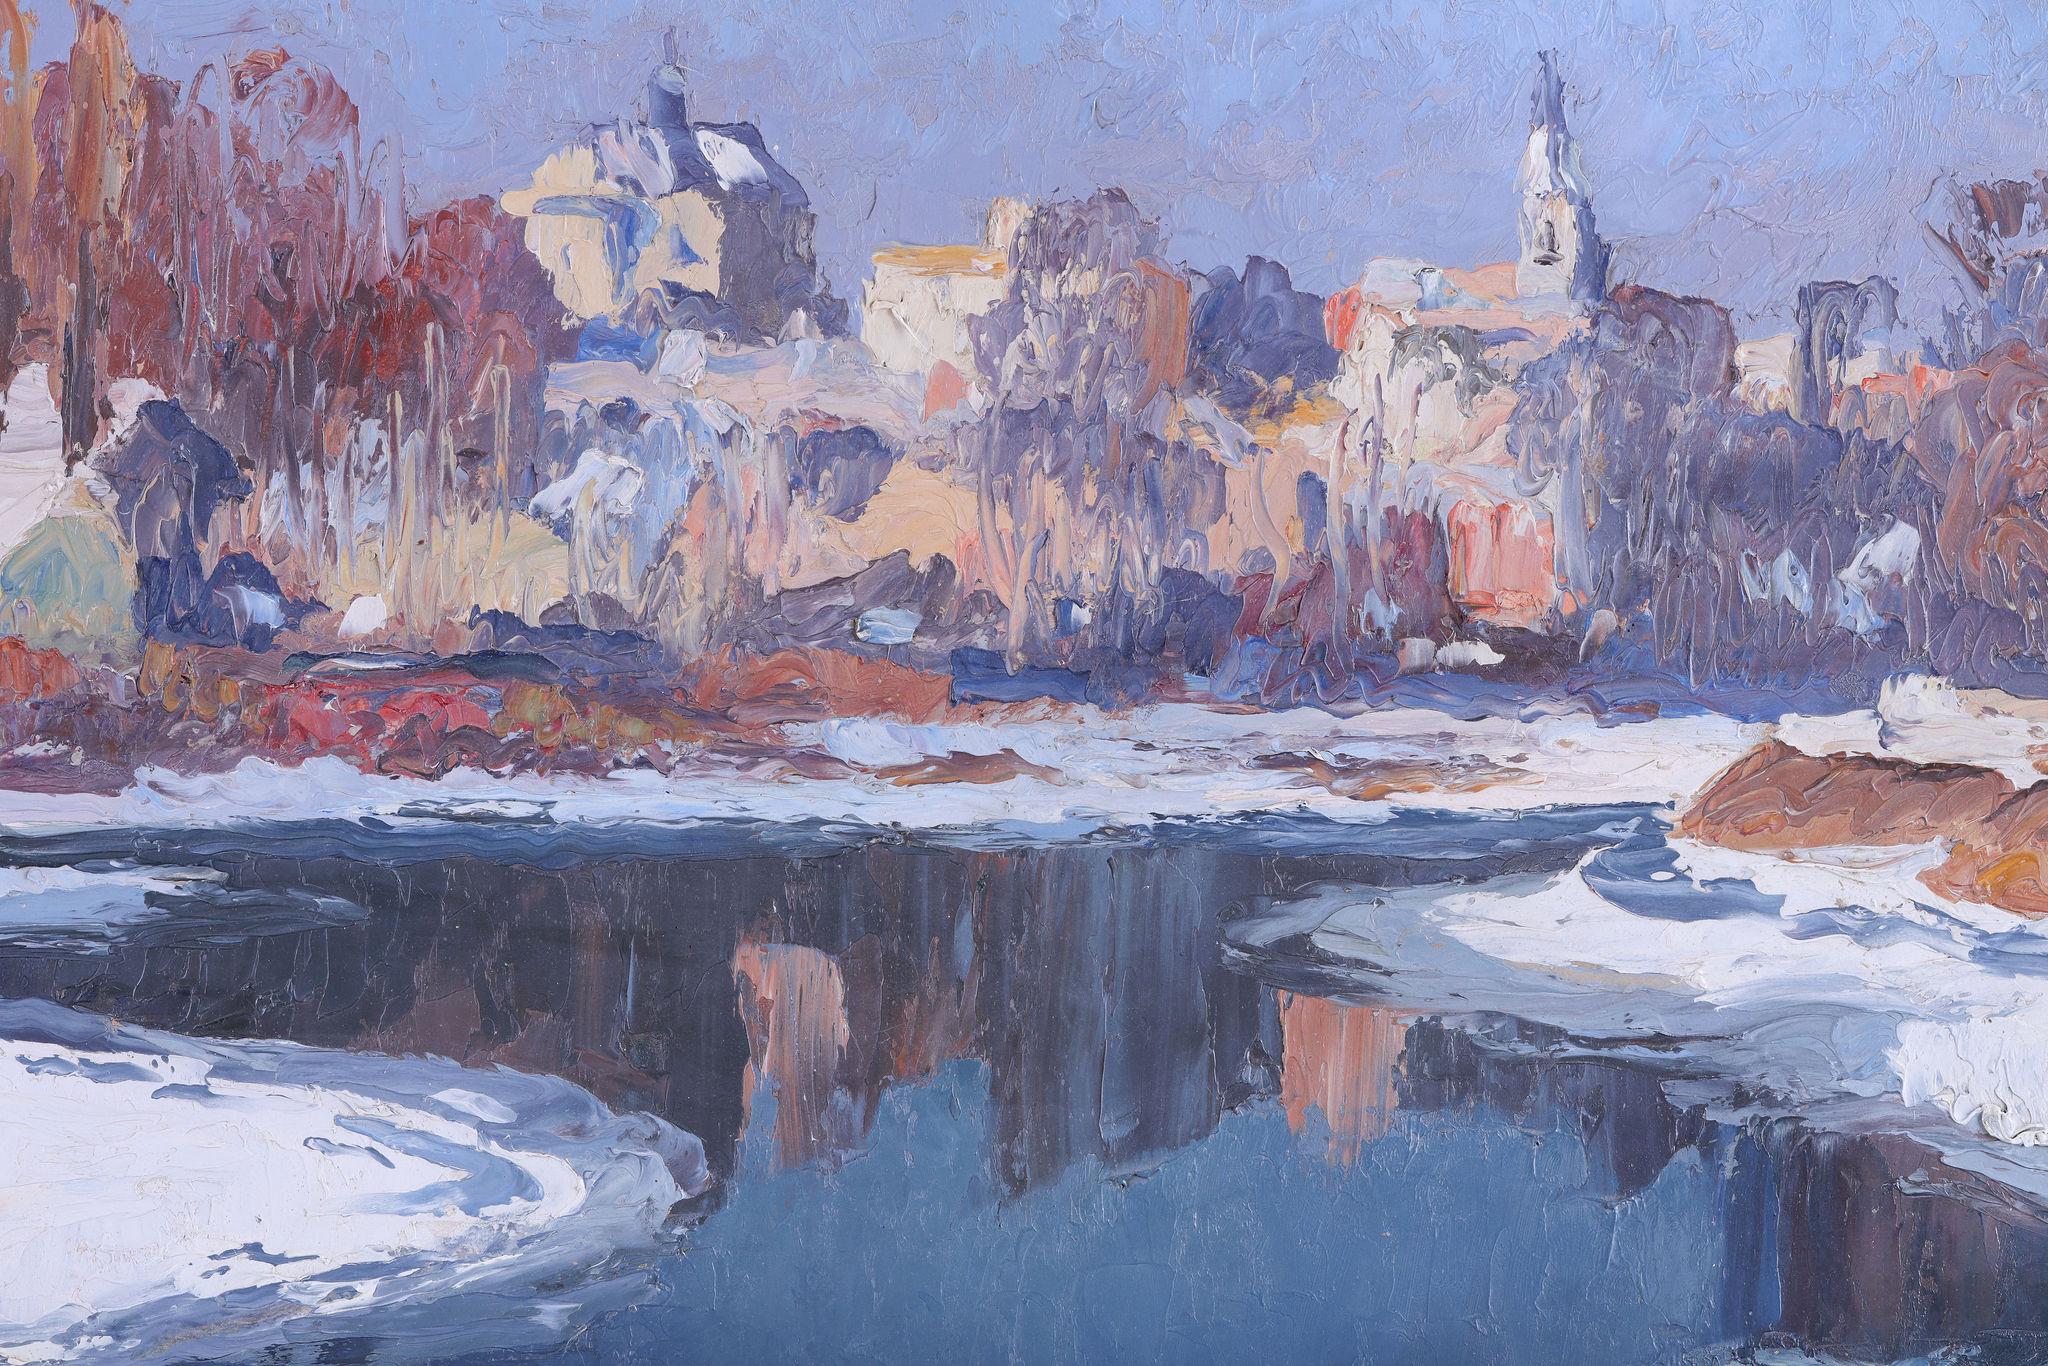 A Winter River Scene - Impressionist Painting by Gaston Balande